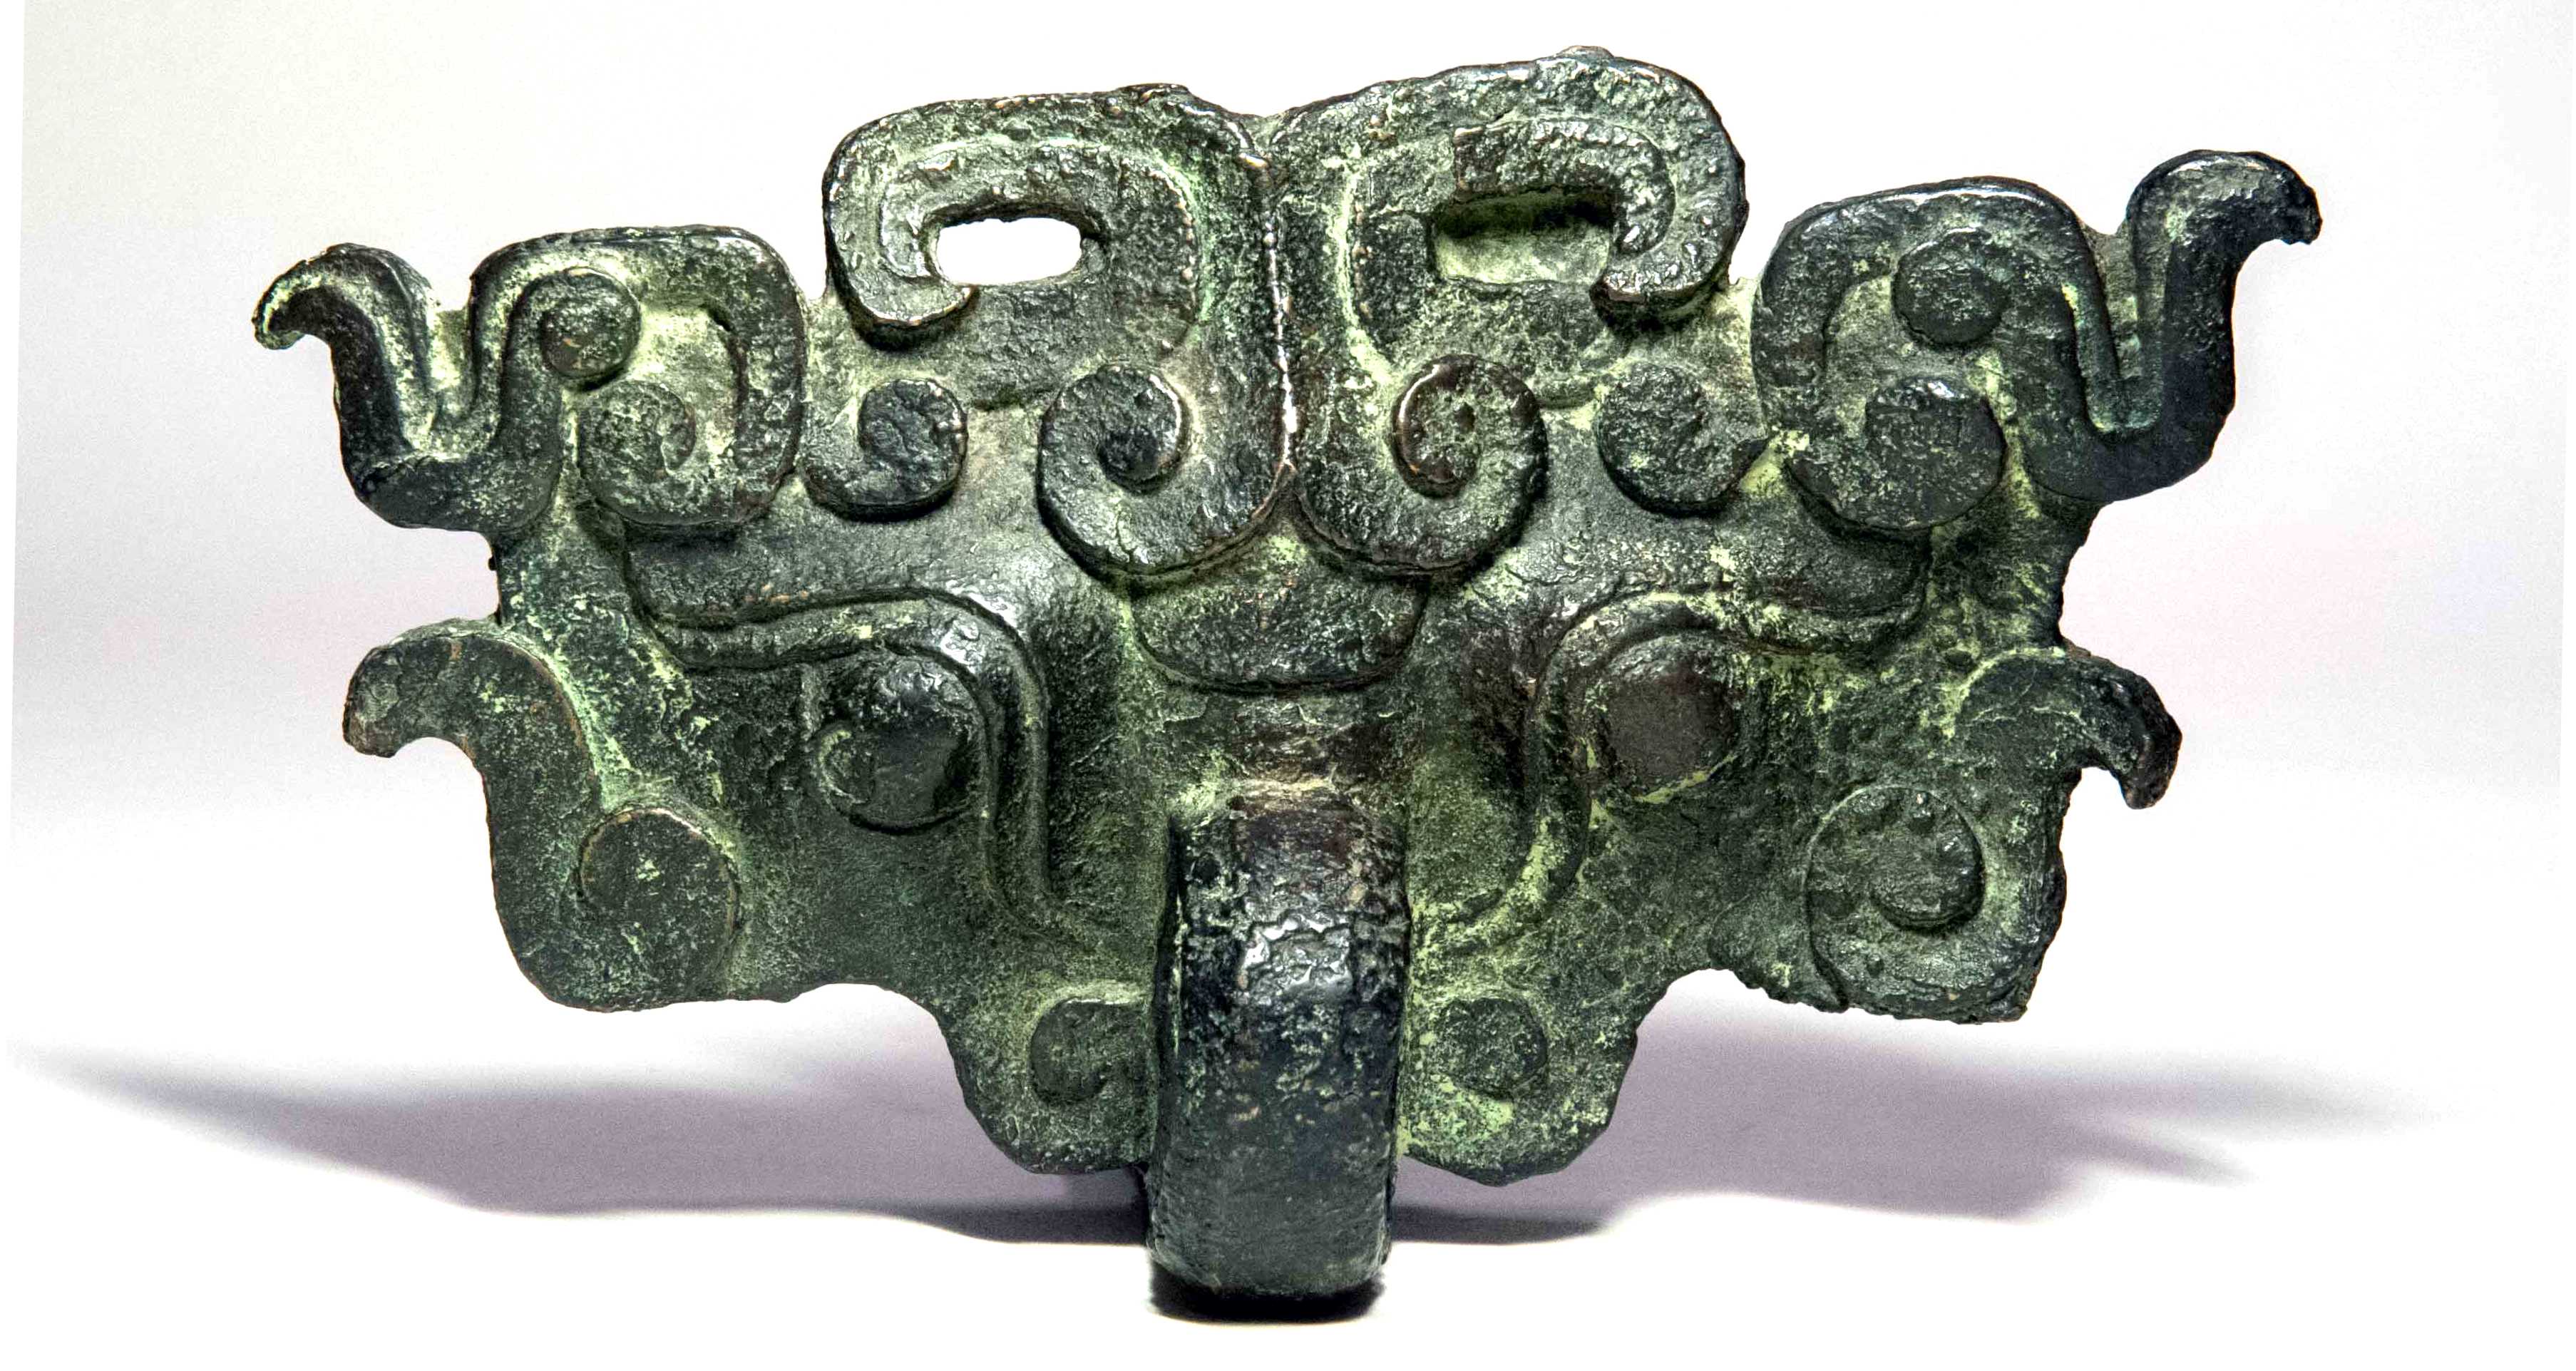 Fire and Clay: New Acquisitions of Chinese Antiquities